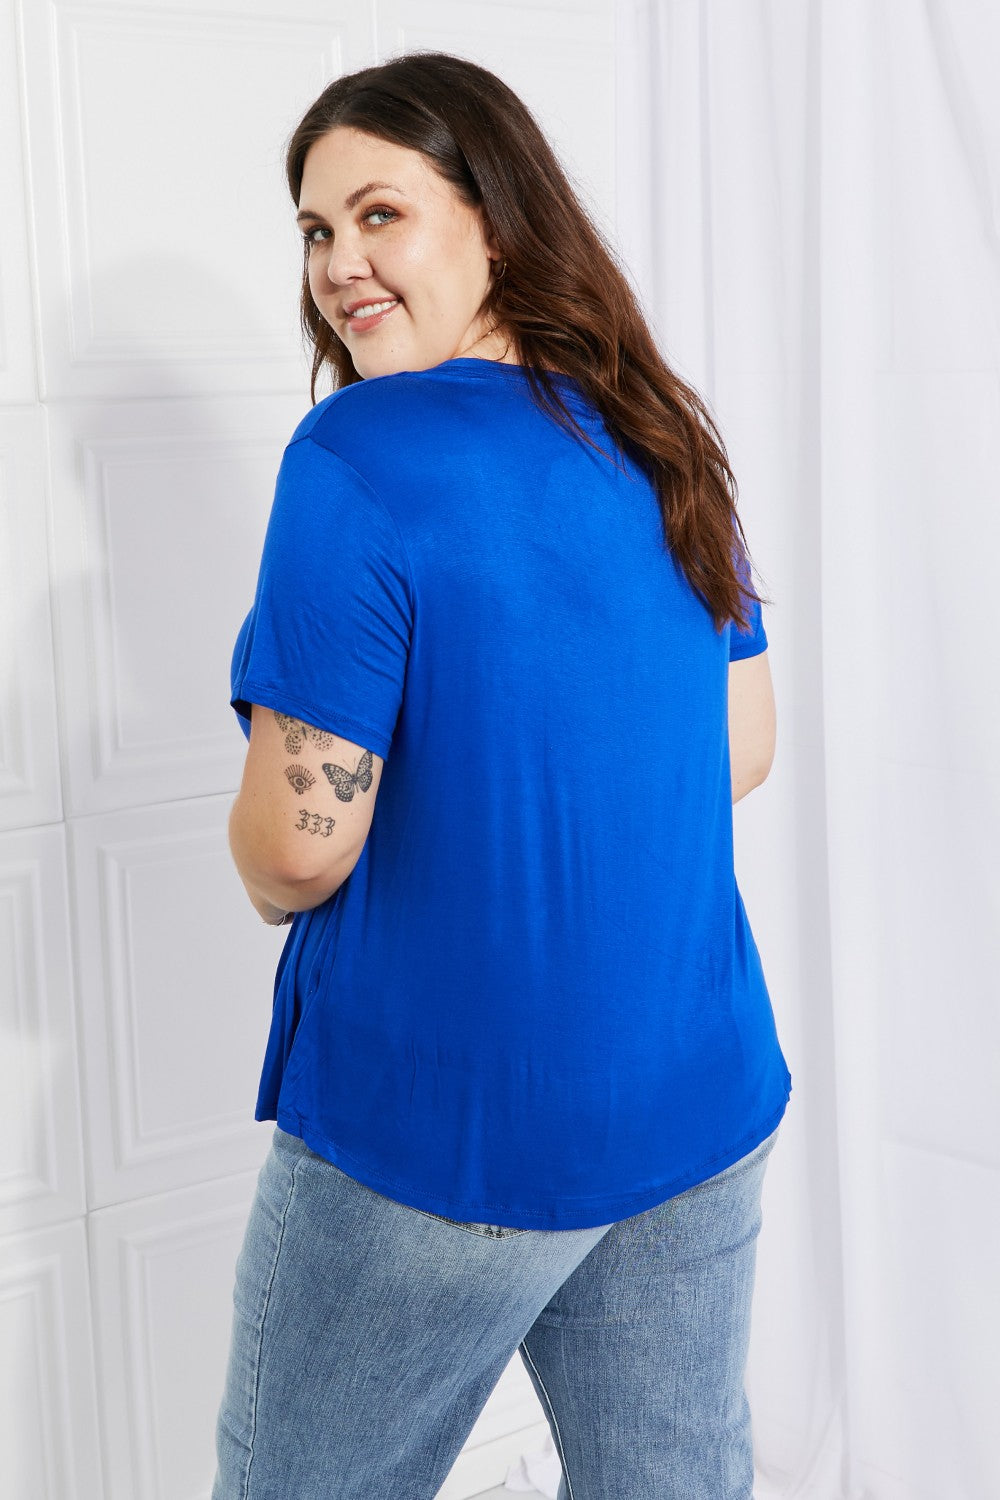 Culture Code Full Size Instant Connection V-Neck Tee | - CHANELIA